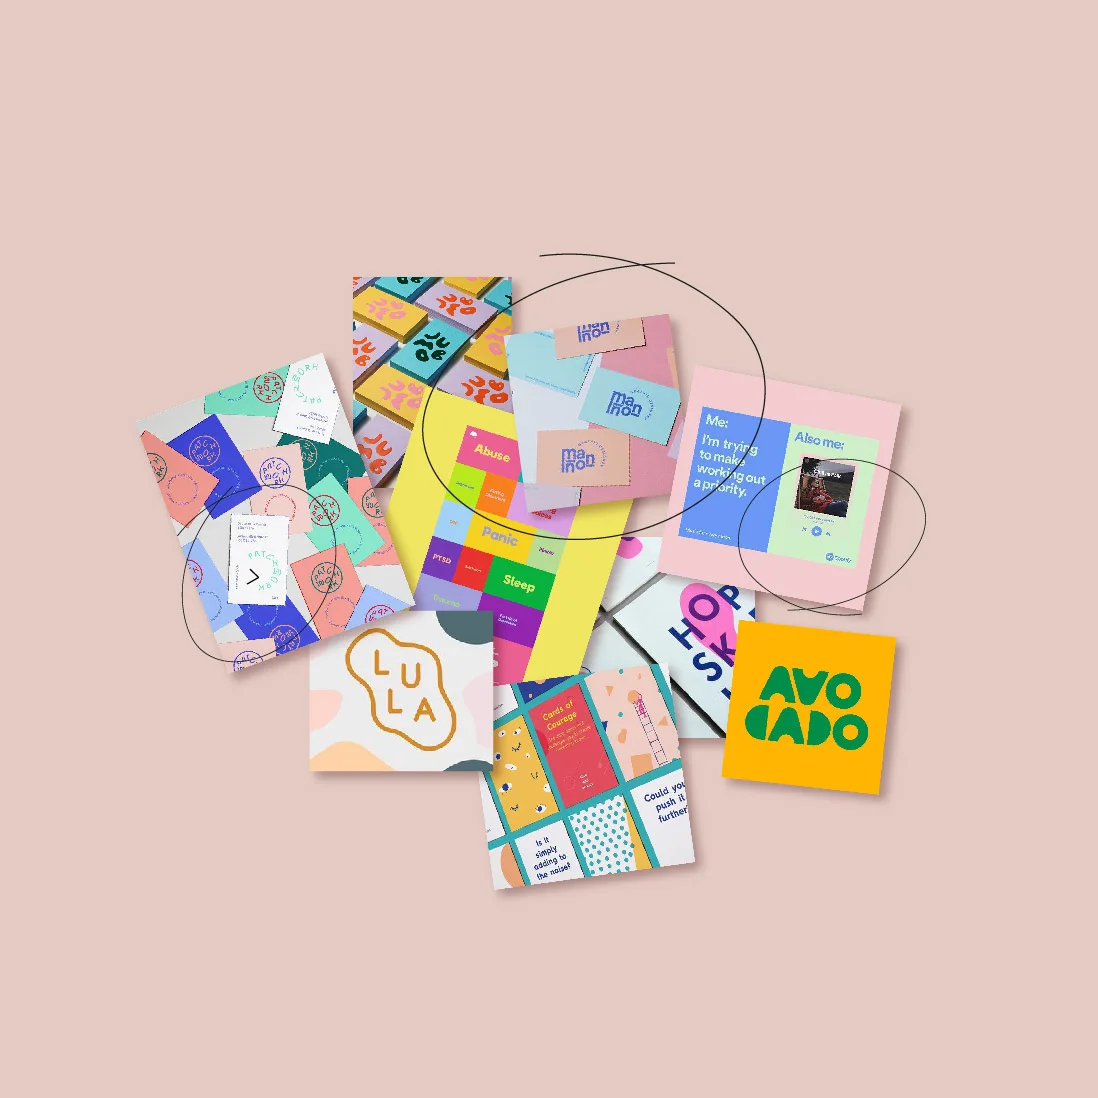 A collection of colorful illustrated cards with various brand designs and texts scattered on a pale pink background.